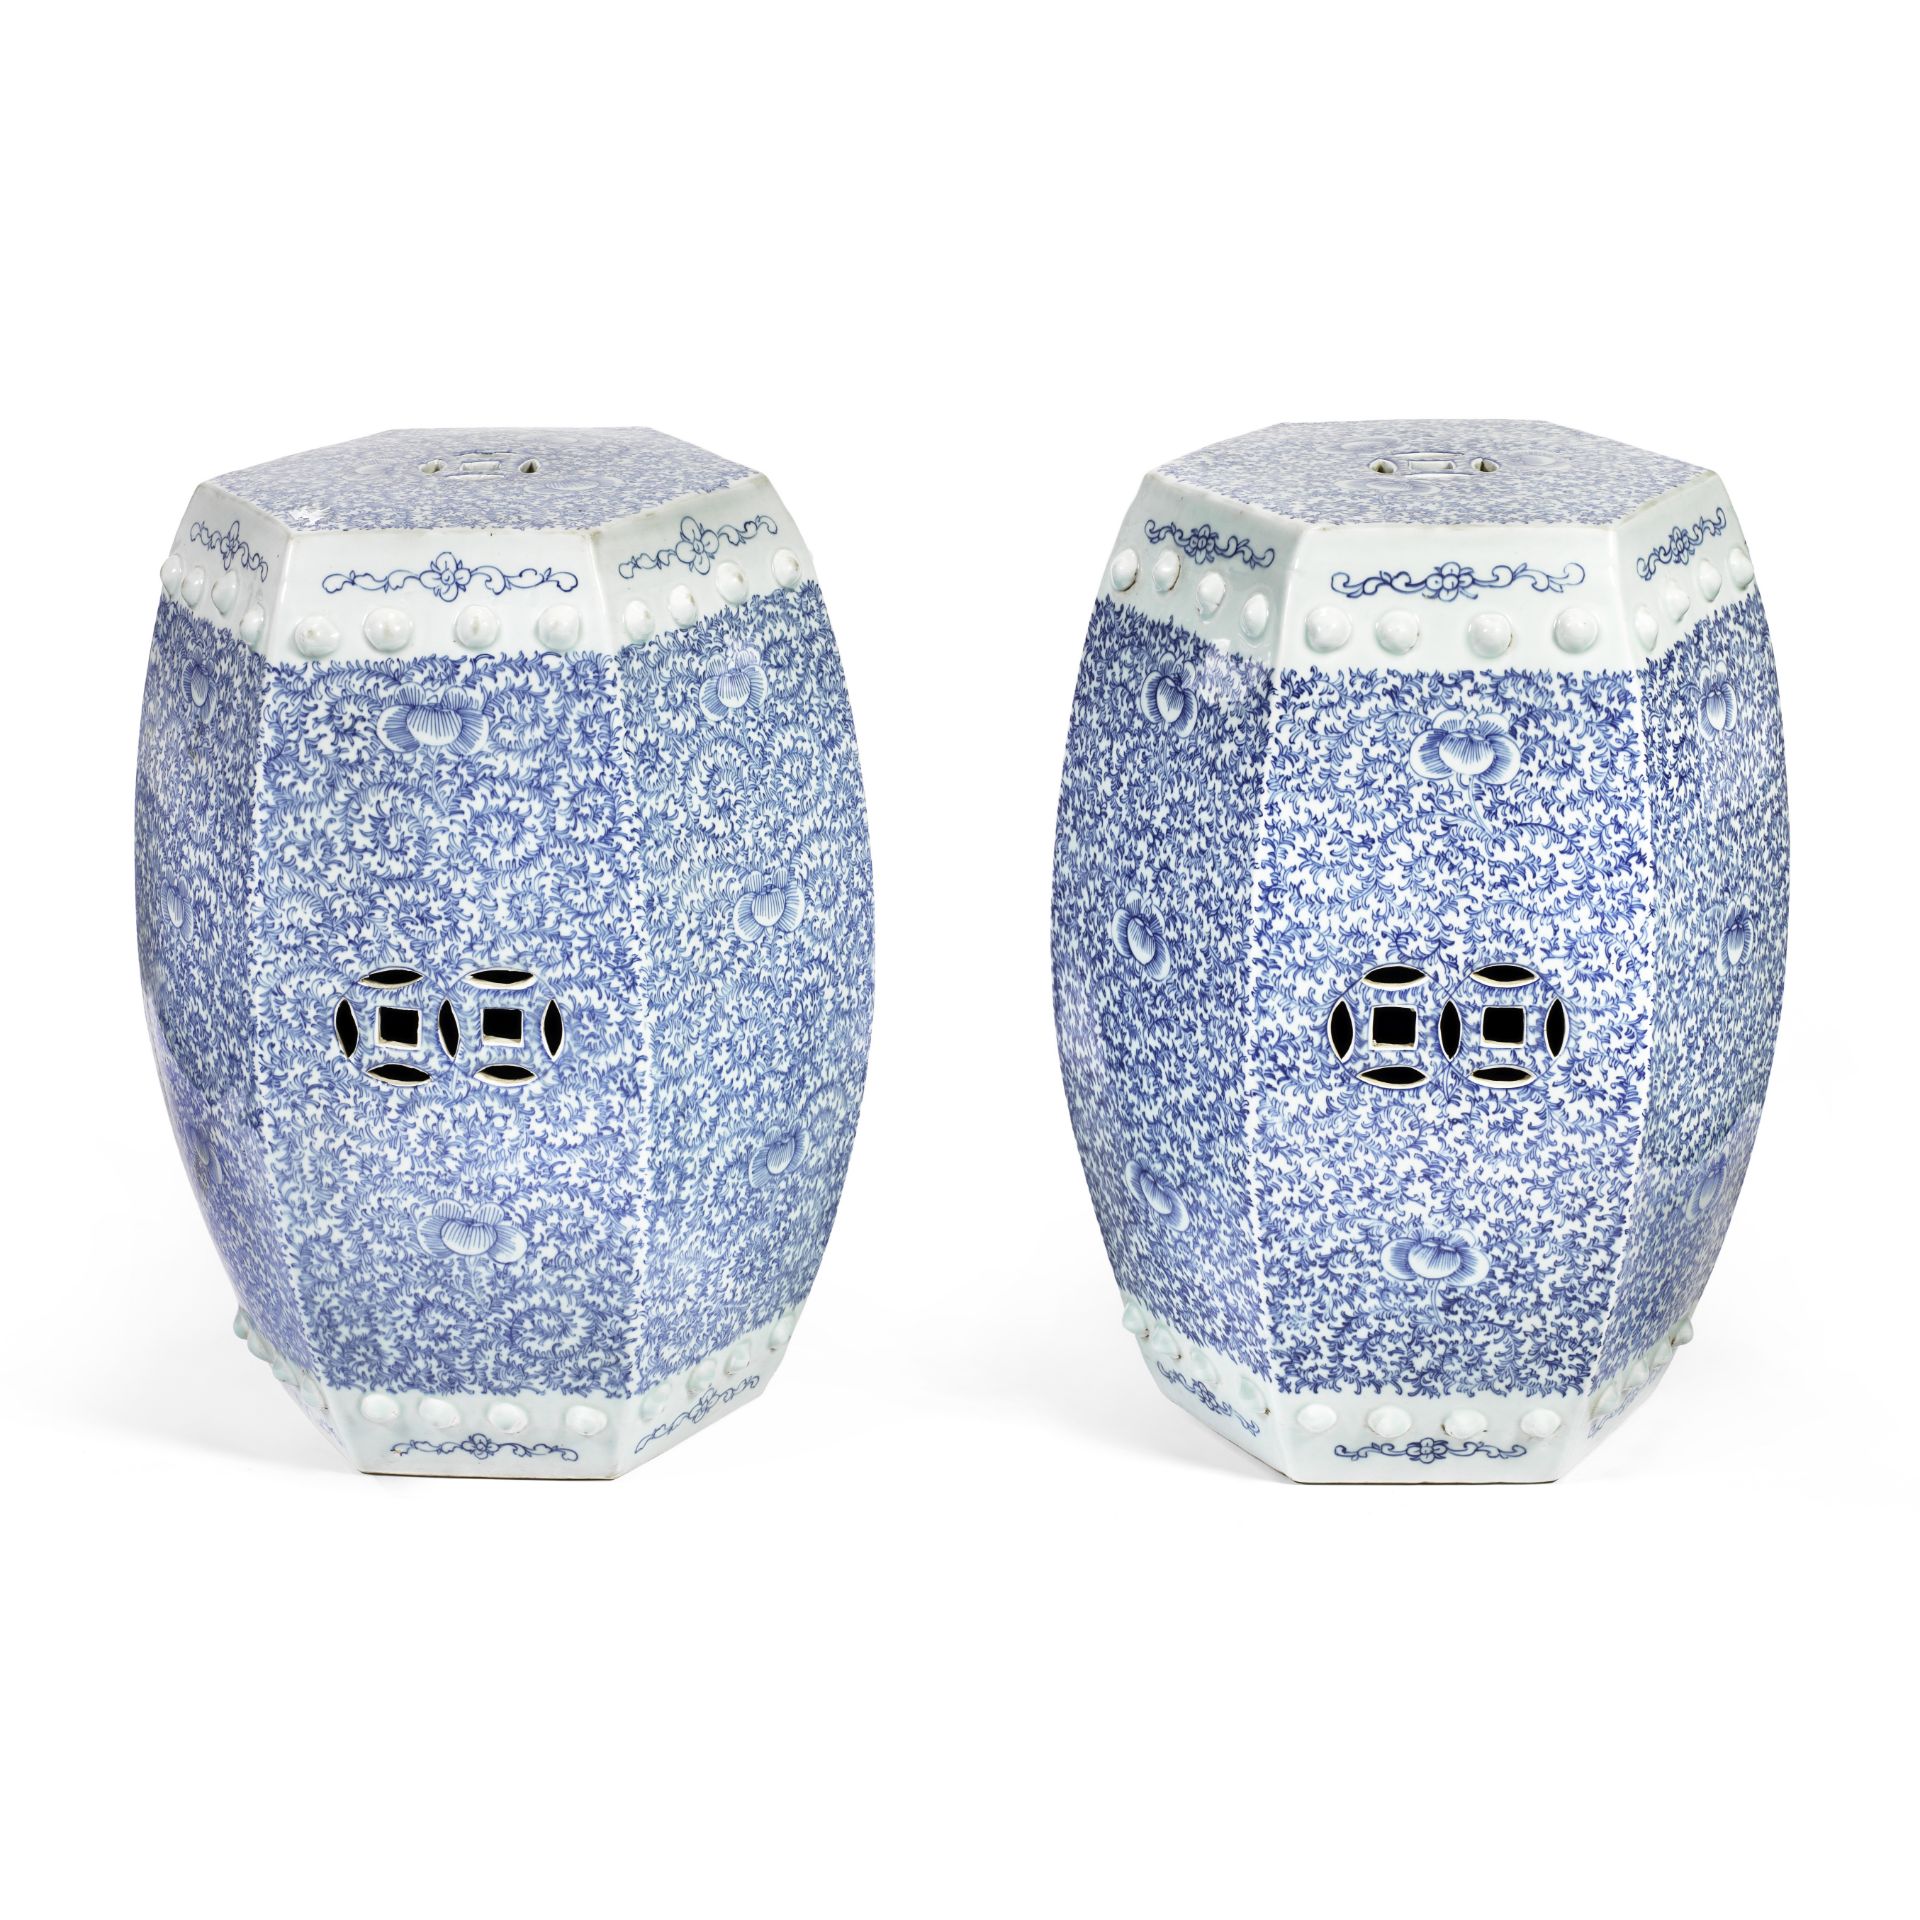 A PAIR OF HEXAGONAL BLUE AND WHITE GARDEN STOOLS 19th century (2)